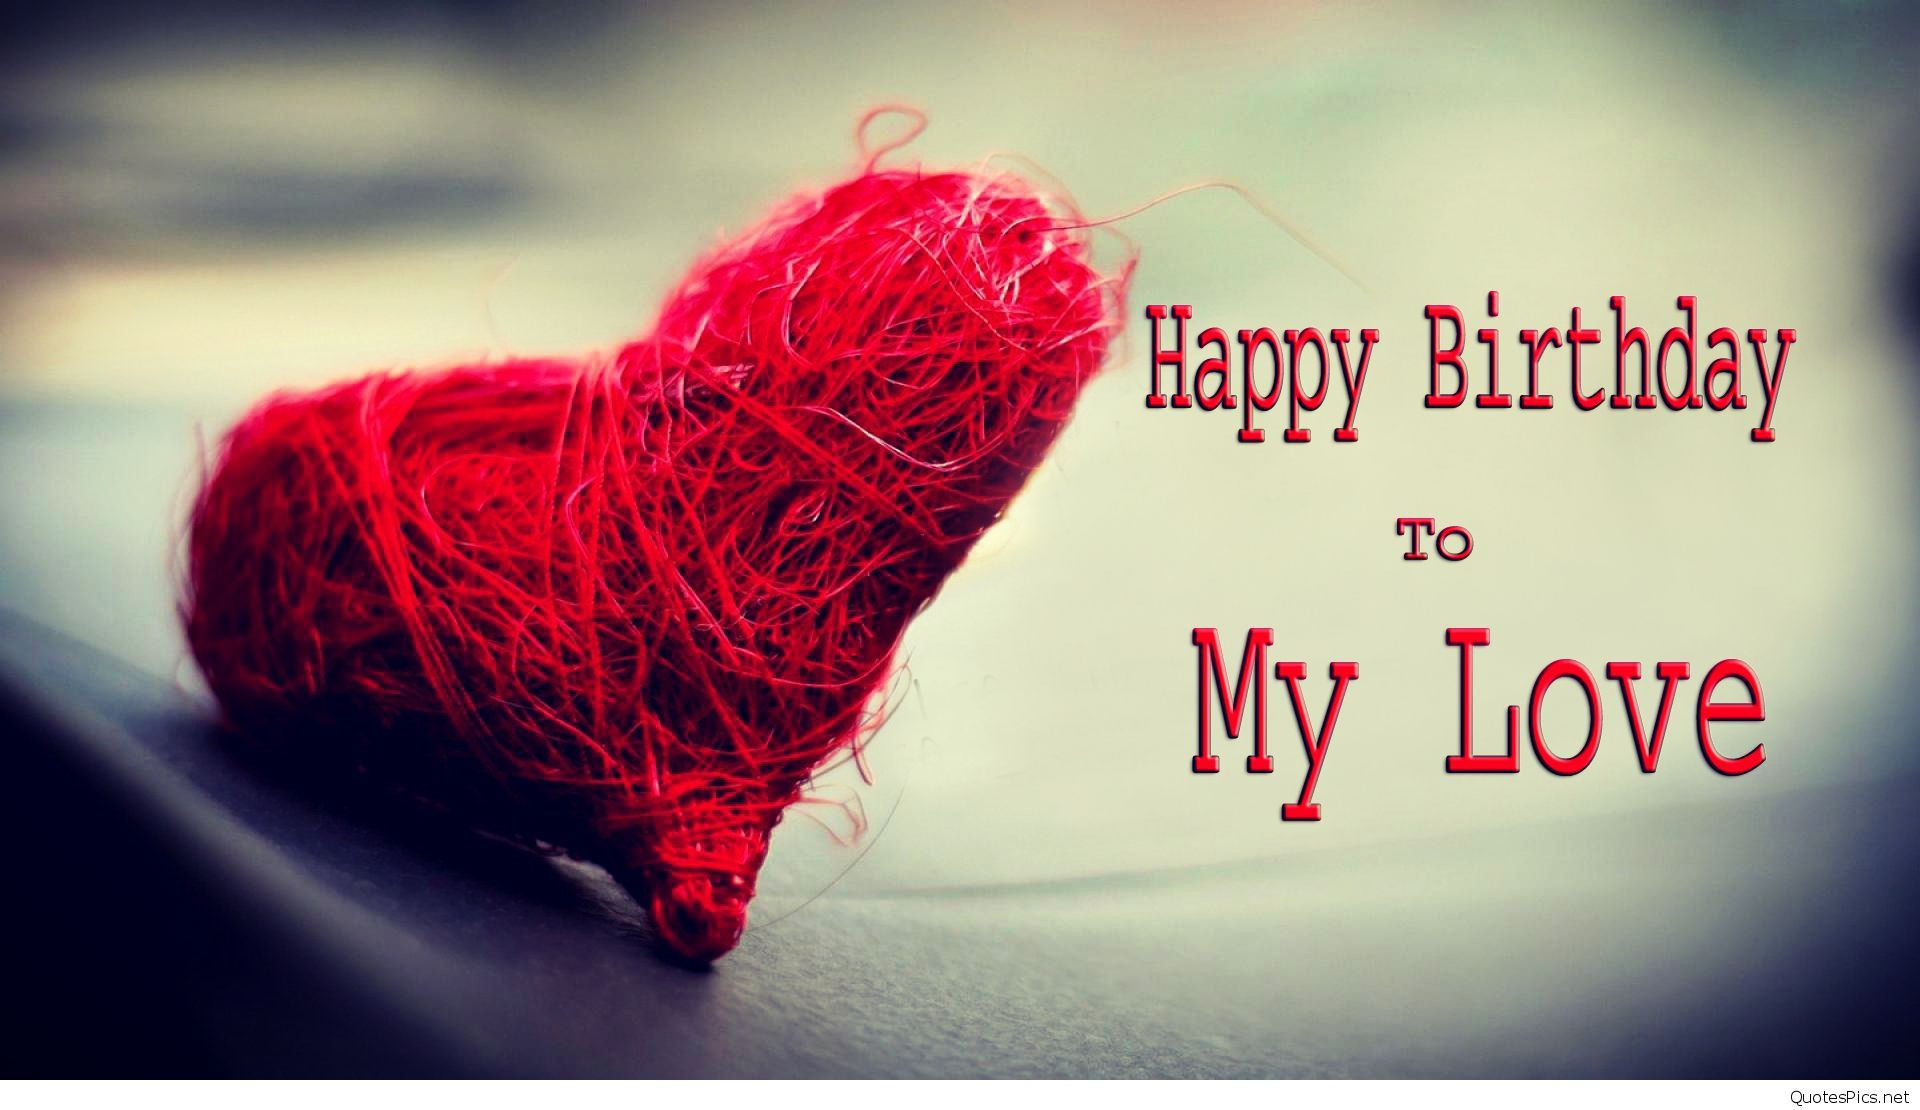 Birthday Quotes To My Love
 Love happy birthday wishes cards sayings